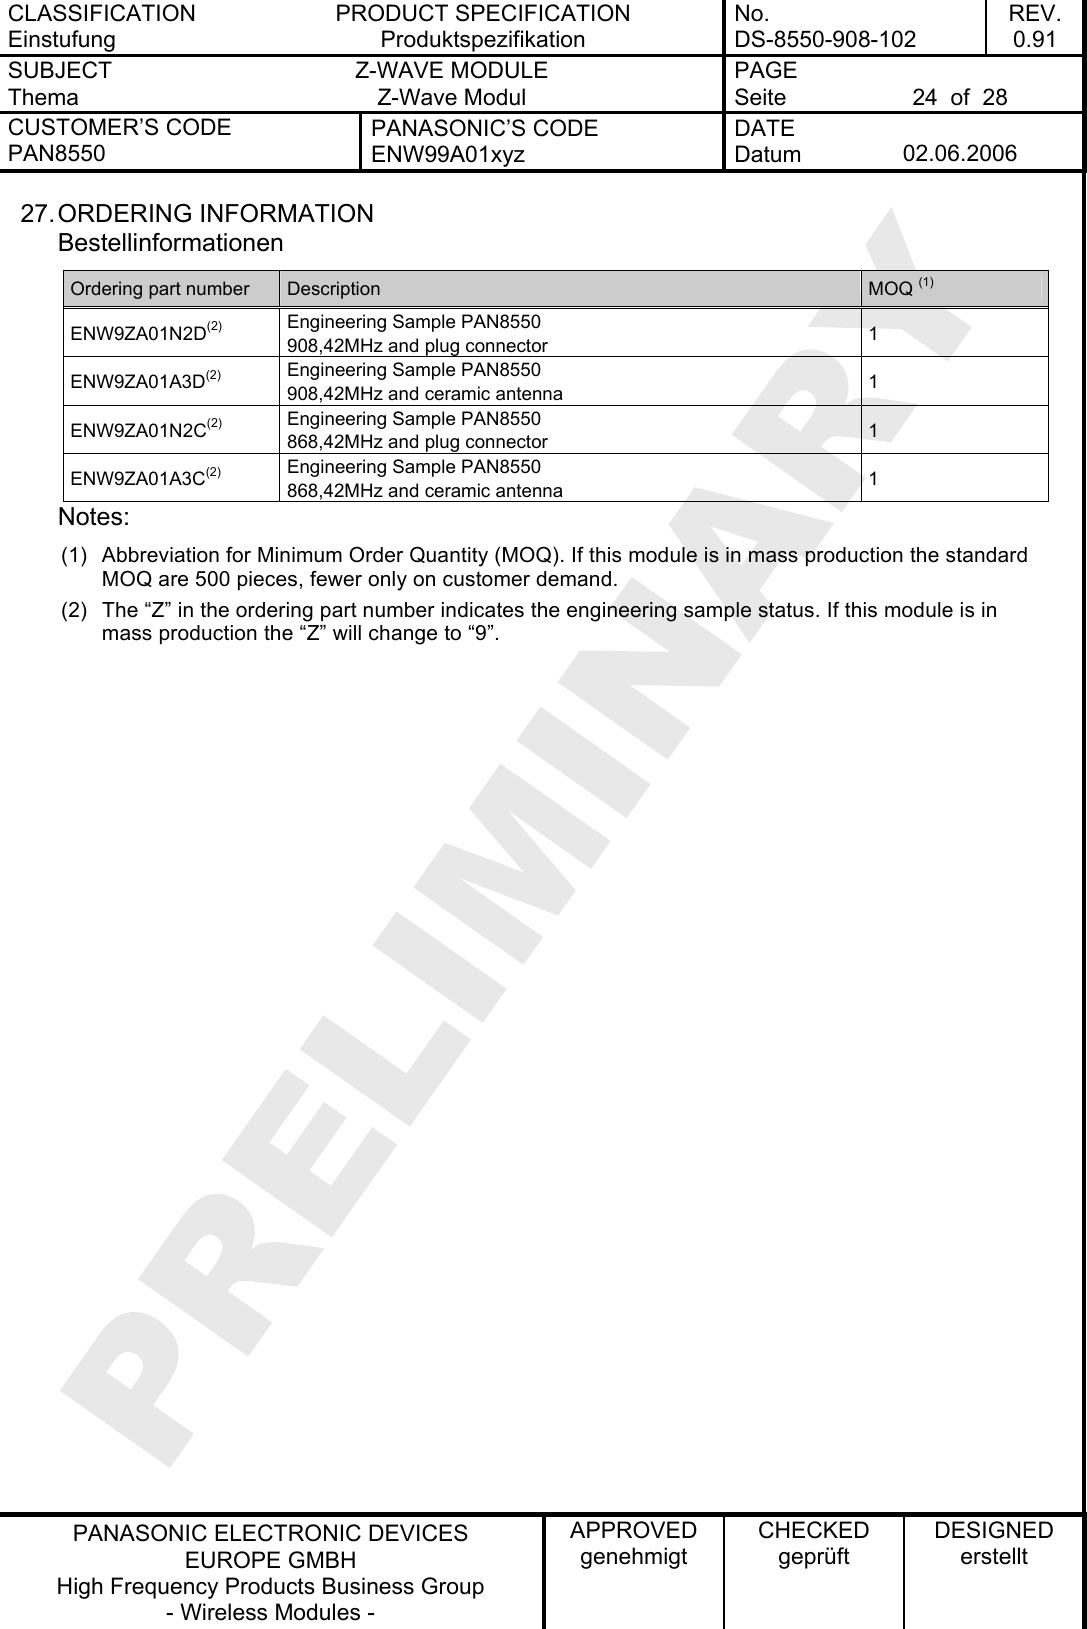 CLASSIFICATION Einstufung PRODUCT SPECIFICATION Produktspezifikation No. DS-8550-908-102 REV. 0.91 SUBJECT Thema Z-WAVE MODULE Z-Wave Modul PAGE Seite  24  of  28 CUSTOMER’S CODE PAN8550 PANASONIC’S CODE ENW99A01xyz DATE Datum  02.06.2006   PANASONIC ELECTRONIC DEVICES EUROPE GMBH High Frequency Products Business Group - Wireless Modules - APPROVED genehmigt CHECKED geprüft DESIGNED erstellt 27. ORDERING  INFORMATION Bestellinformationen Ordering part number  Description  MOQ (1) ENW9ZA01N2D(2) Engineering Sample PAN8550 908,42MHz and plug connector  1 ENW9ZA01A3D(2) Engineering Sample PAN8550 908,42MHz and ceramic antenna  1 ENW9ZA01N2C(2) Engineering Sample PAN8550 868,42MHz and plug connector  1 ENW9ZA01A3C(2) Engineering Sample PAN8550 868,42MHz and ceramic antenna  1 Notes: (1)  Abbreviation for Minimum Order Quantity (MOQ). If this module is in mass production the standard MOQ are 500 pieces, fewer only on customer demand. (2)  The “Z” in the ordering part number indicates the engineering sample status. If this module is in mass production the “Z” will change to “9”.  